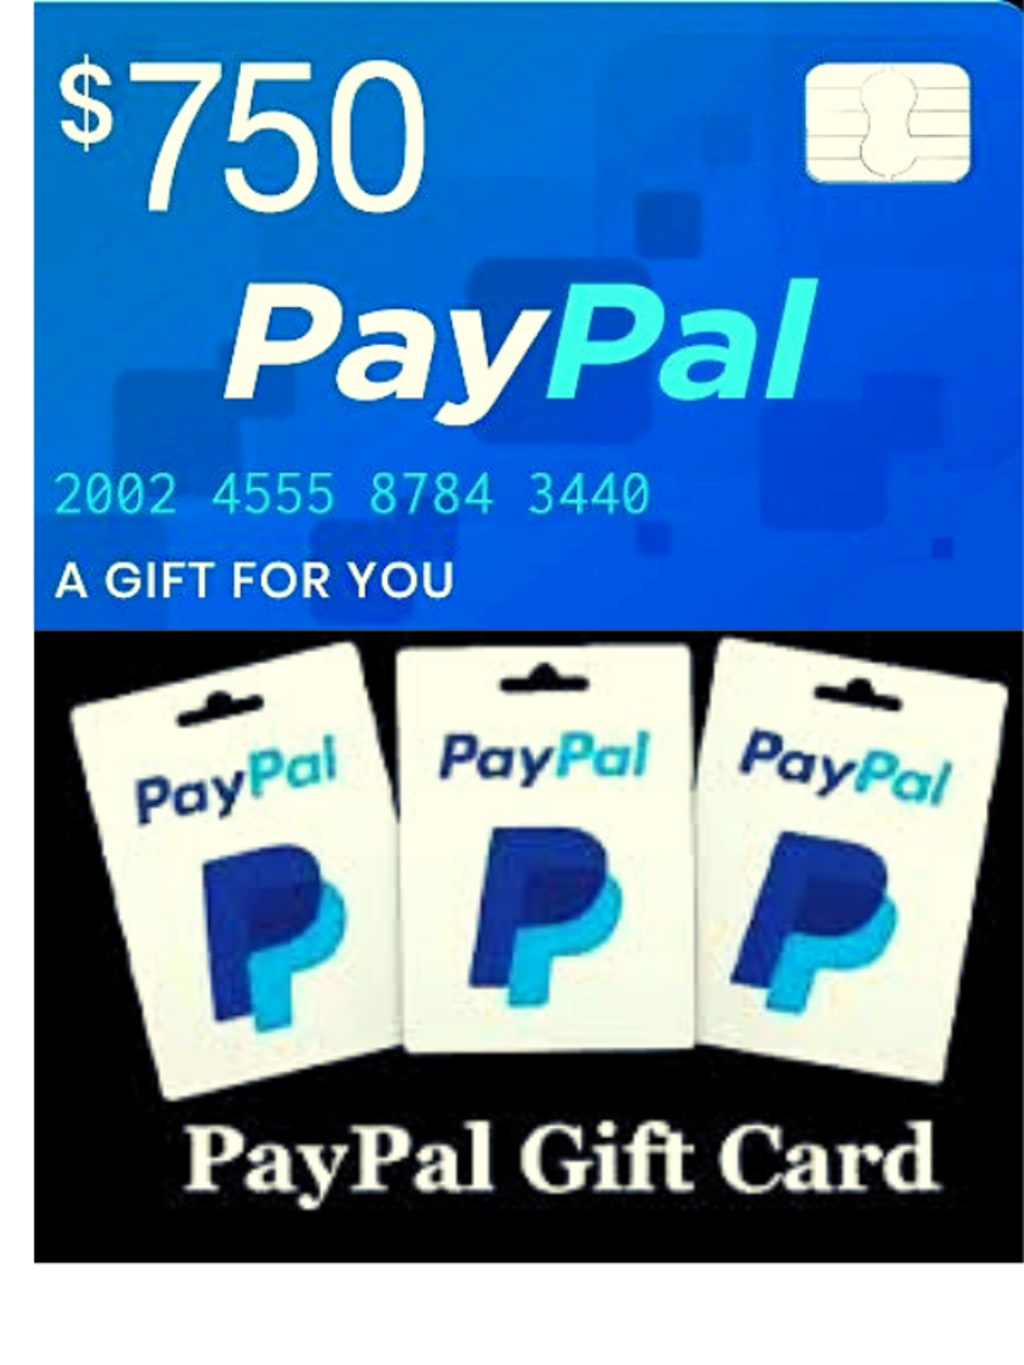 PayPal Digital Gift Ideas | Send Gifts Online | PayPal UK